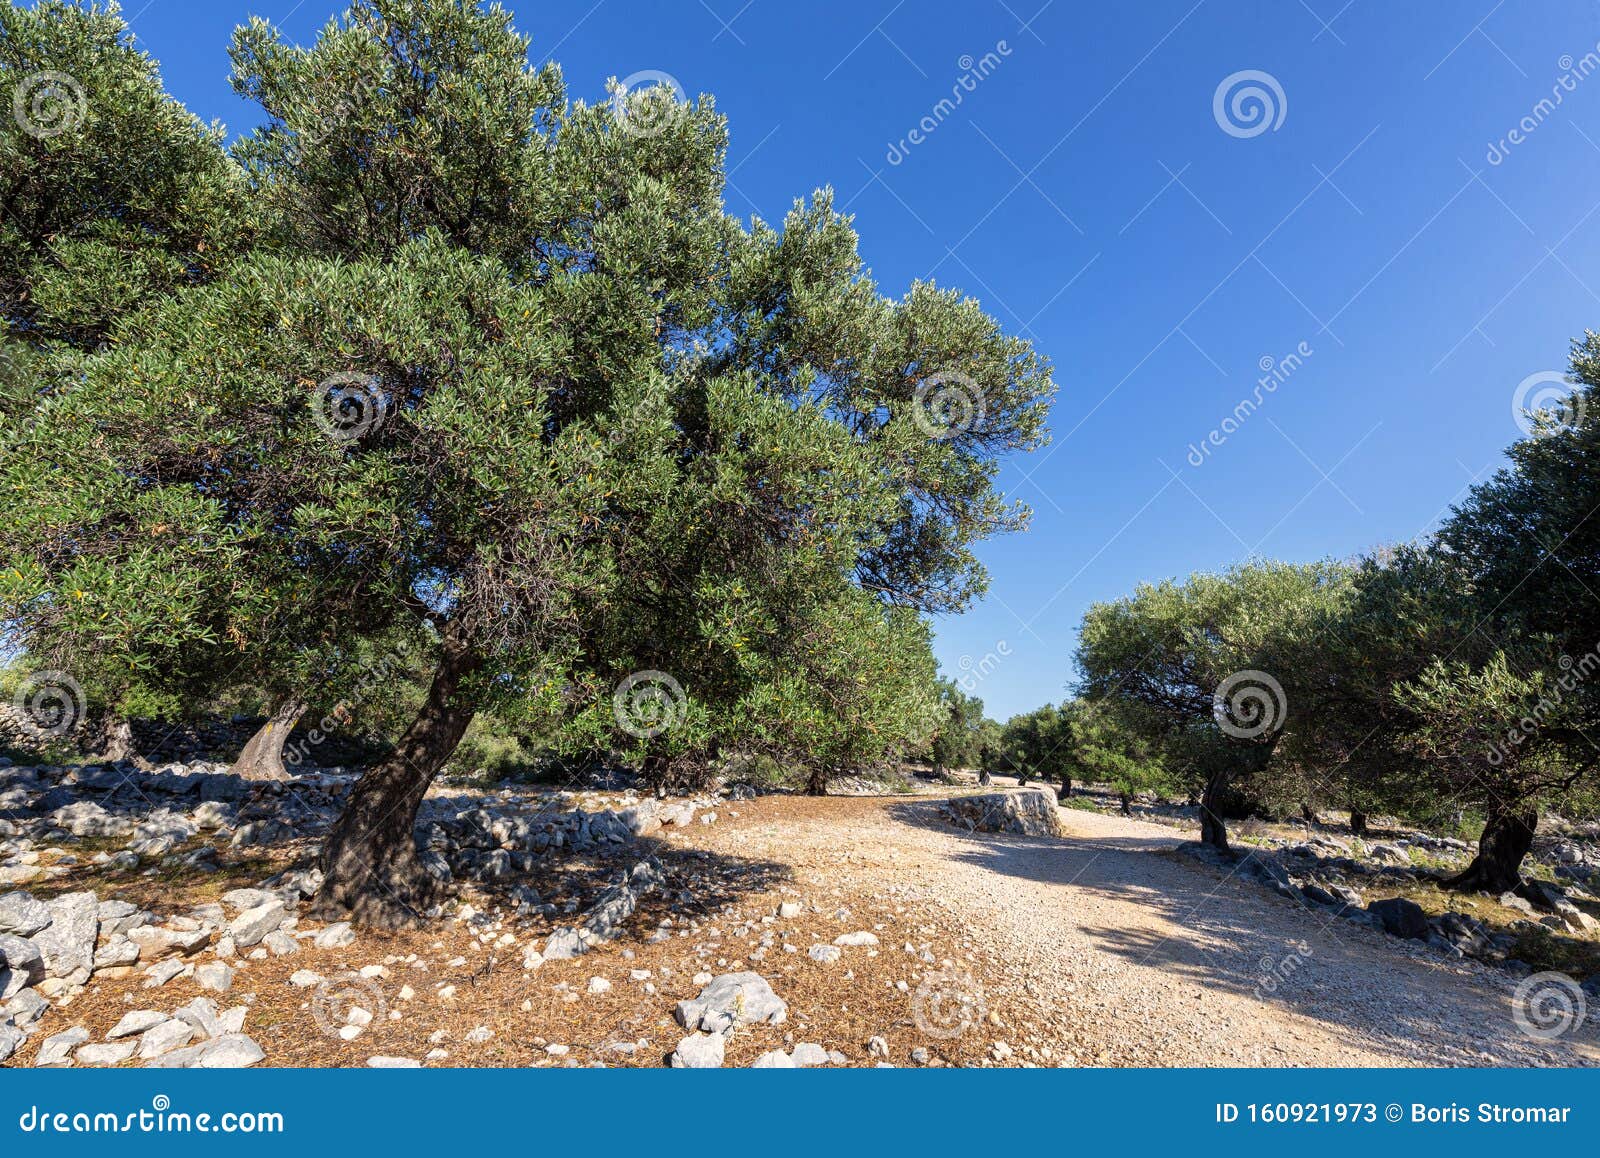 Olive Garden In Lun Croatia Stock Image Image Of Tree Olive